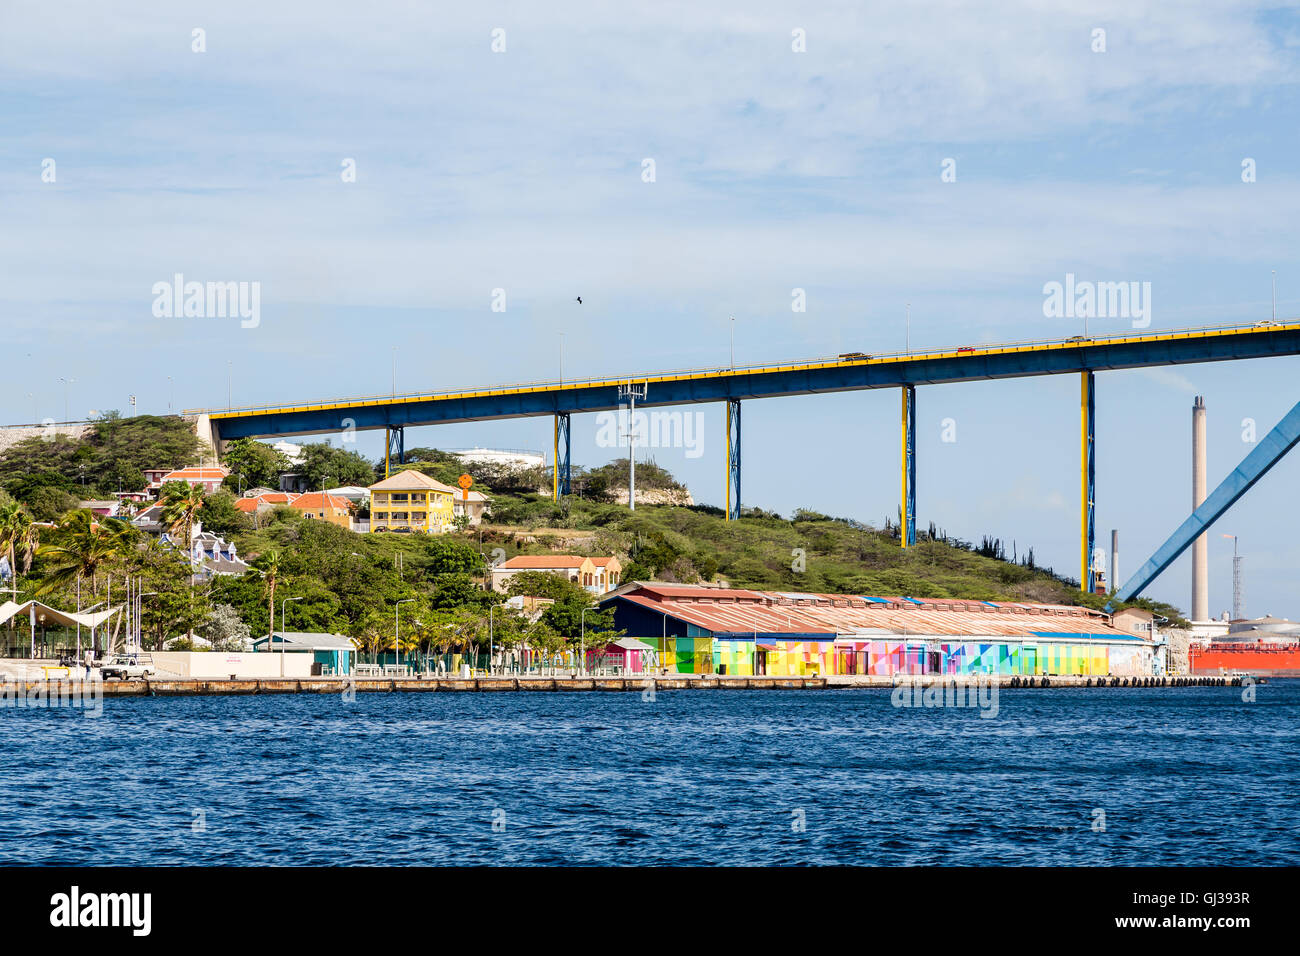 Colorful buildings in Curacao under the blue sky bridge Stock Photo